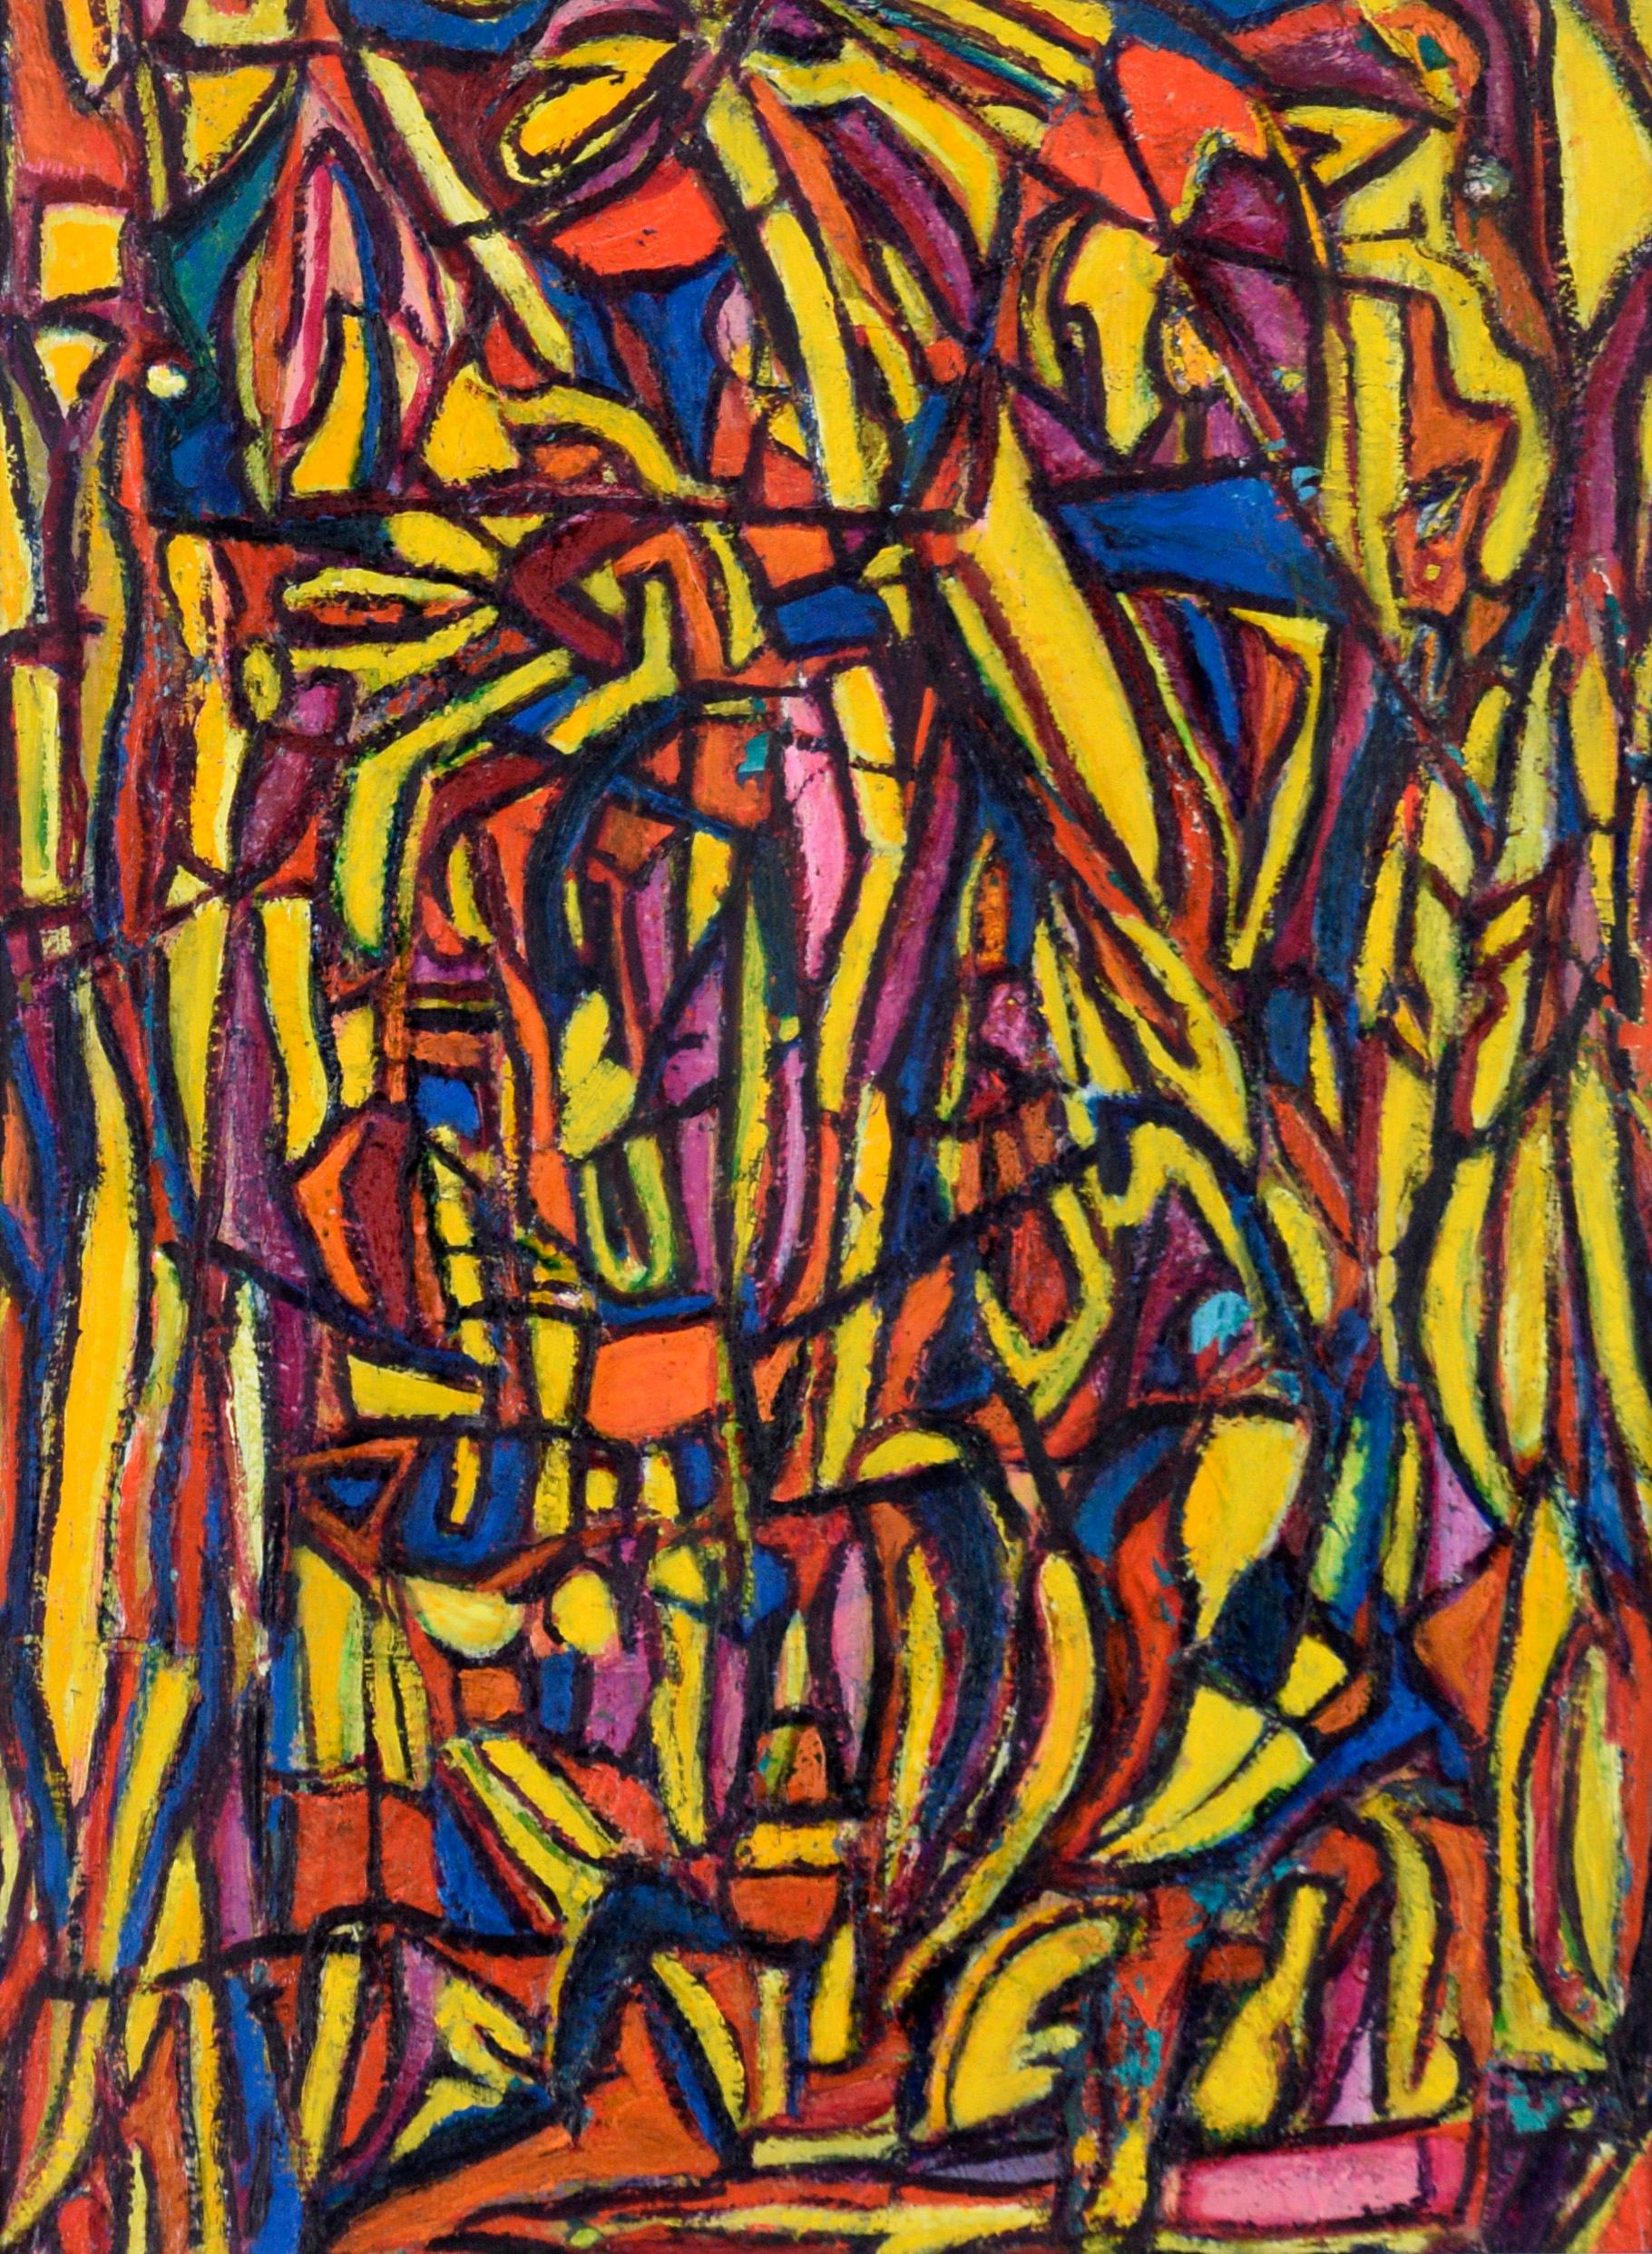 Psychedelic Abstract in Yellow, Blue, and Orange - Oil on Paper - Painting by Jennie Rafton